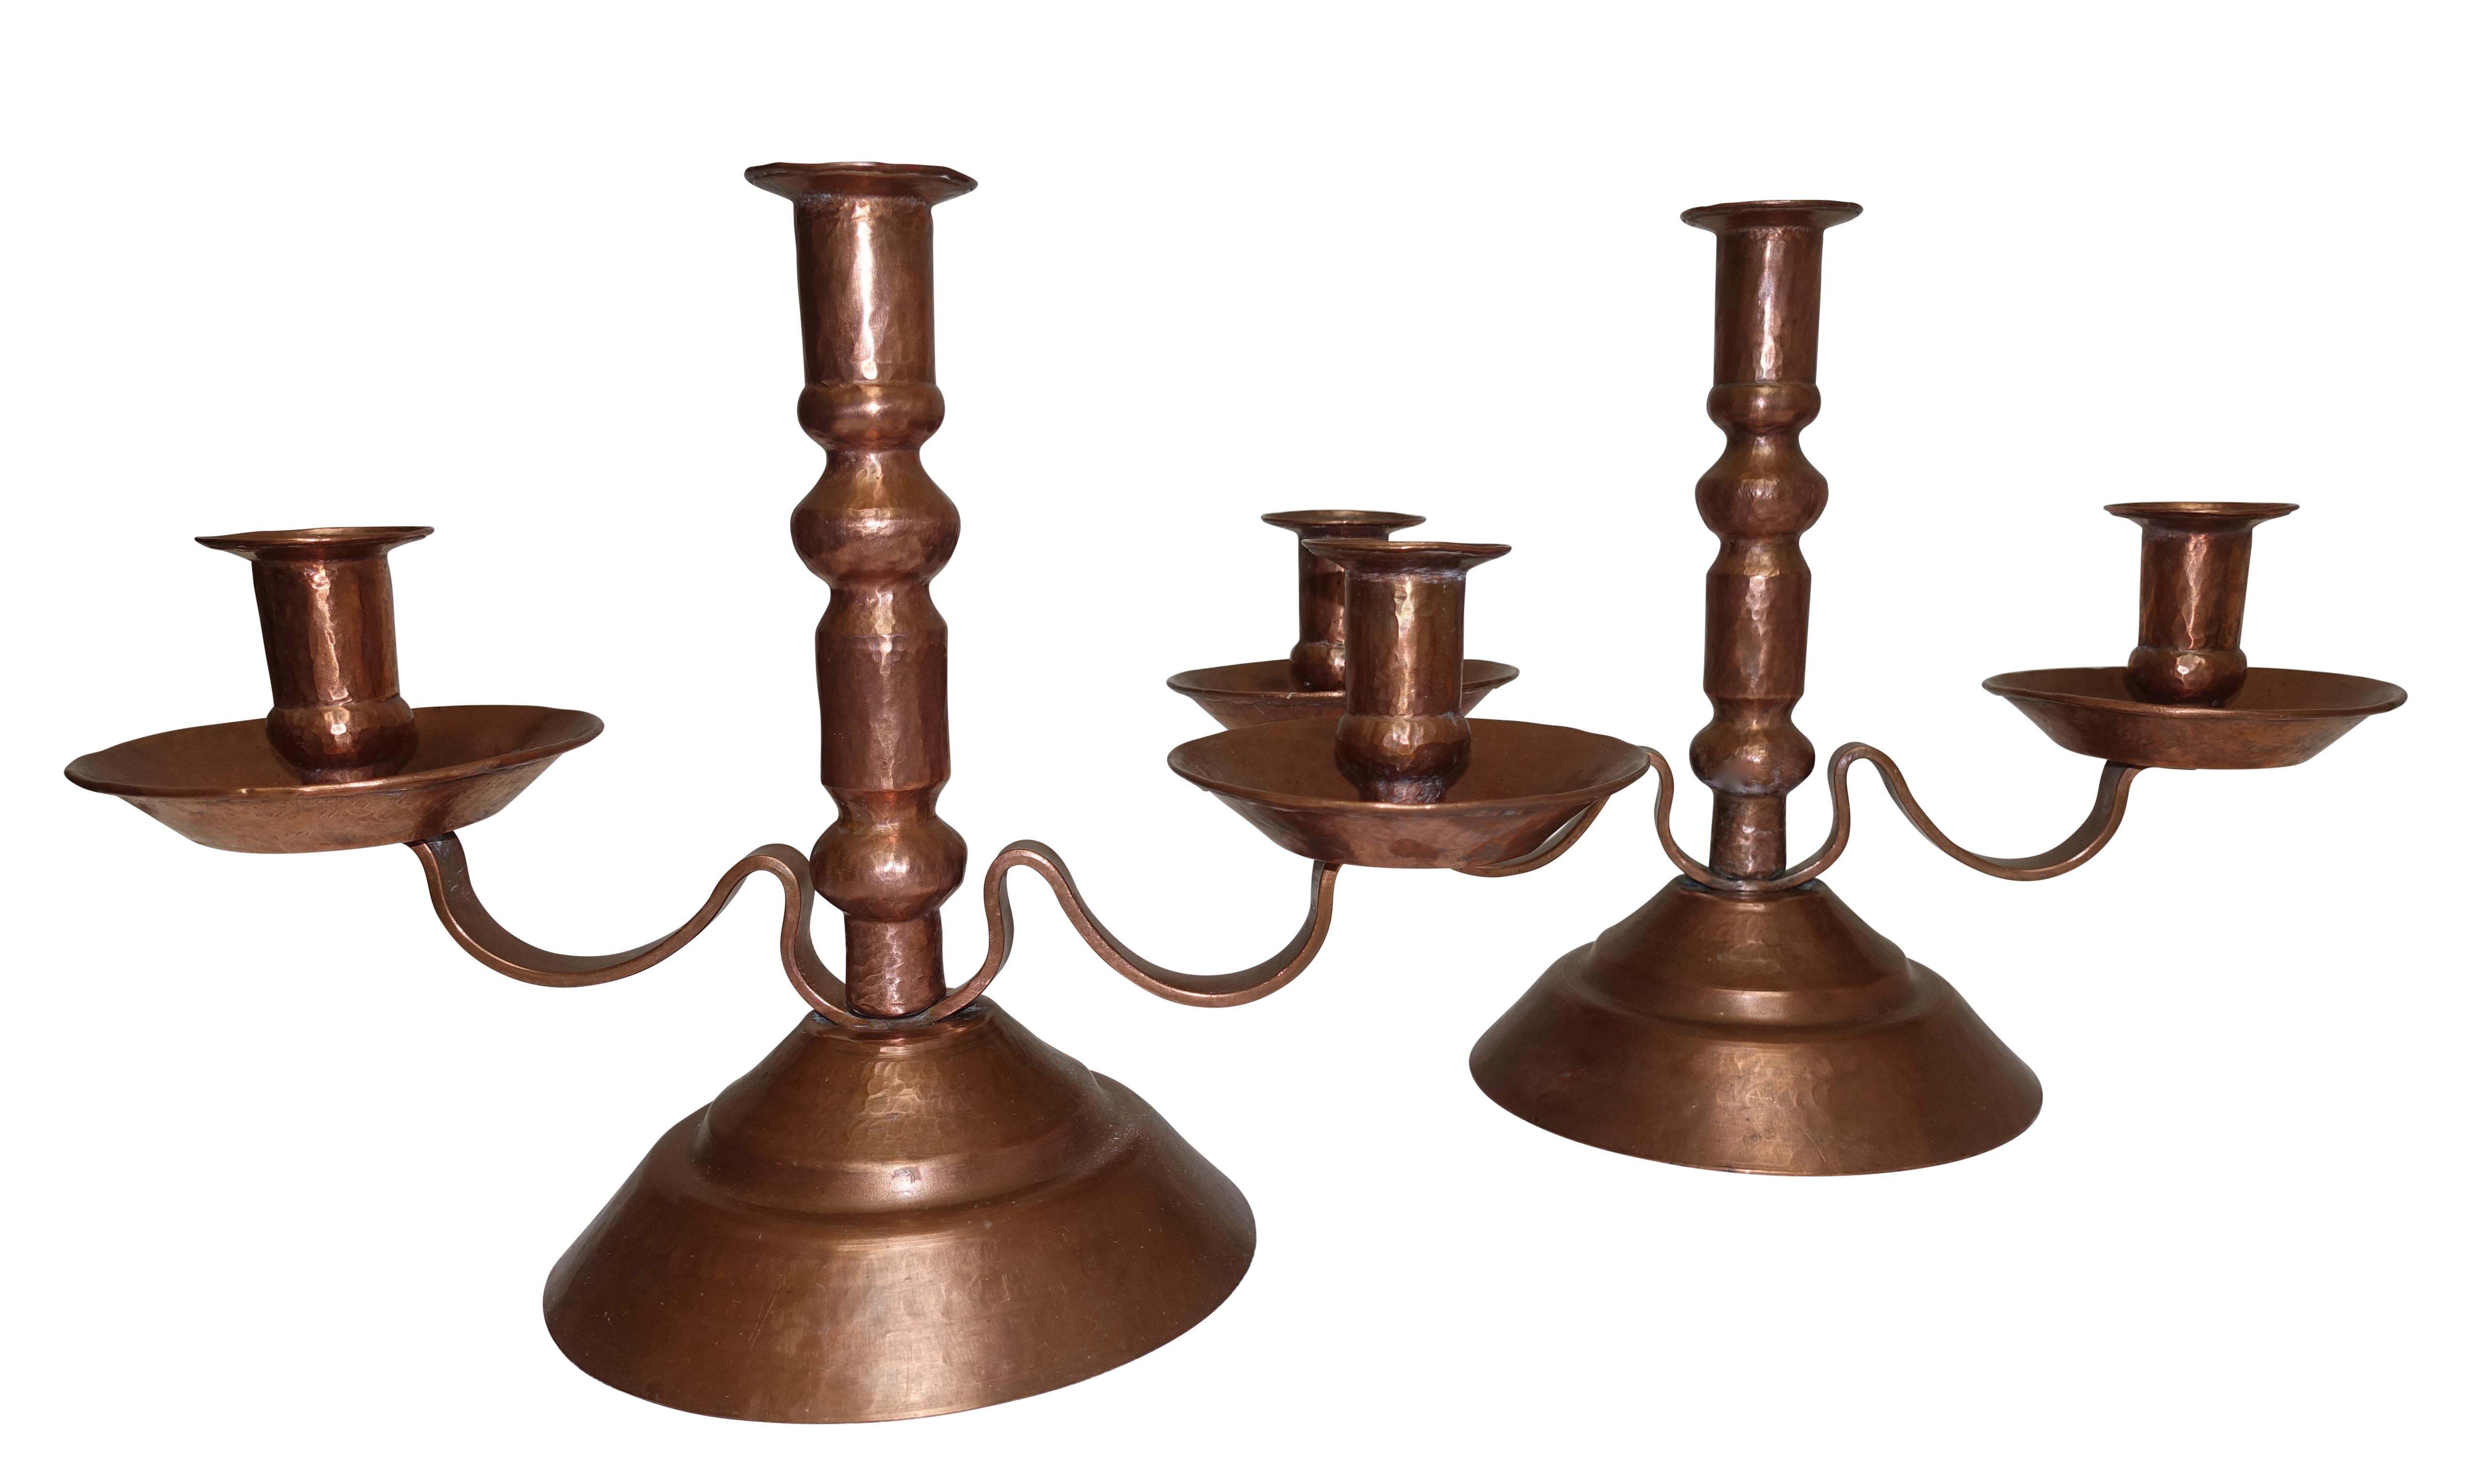 A pair of hand-hammered copper candleholders, Mexico, early to mid-20th century.